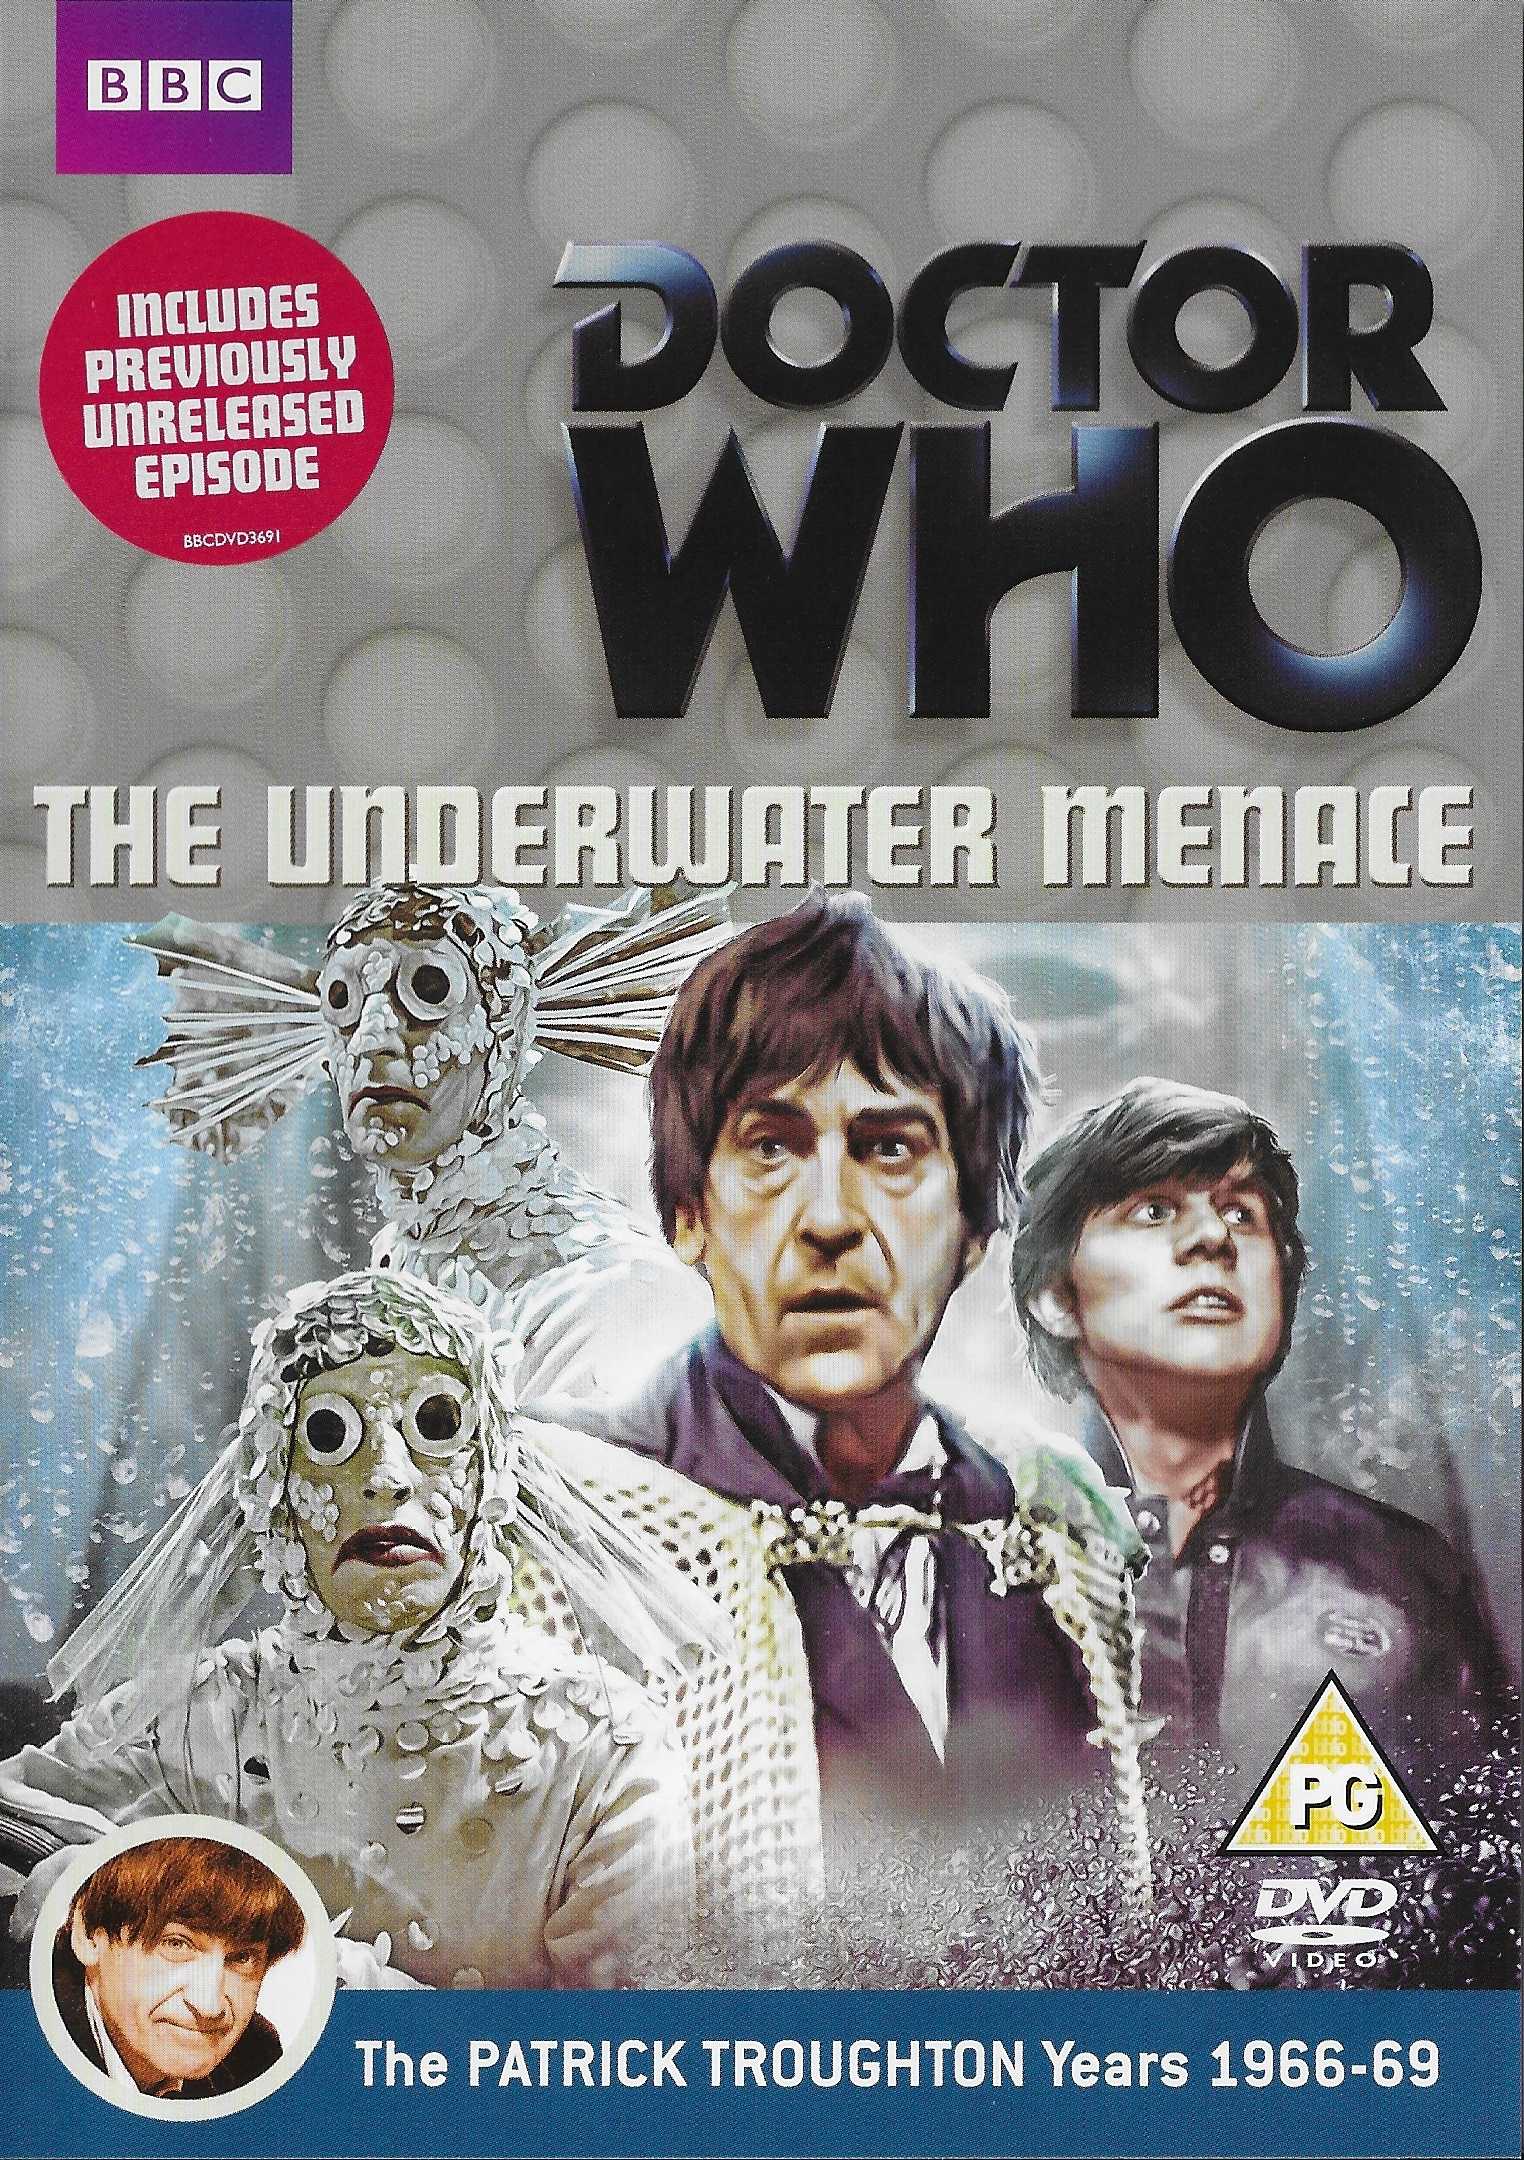 Picture of BBCDVD 3691 Doctor Who - The underwater menace by artist Geoffrey Orme from the BBC dvds - Records and Tapes library